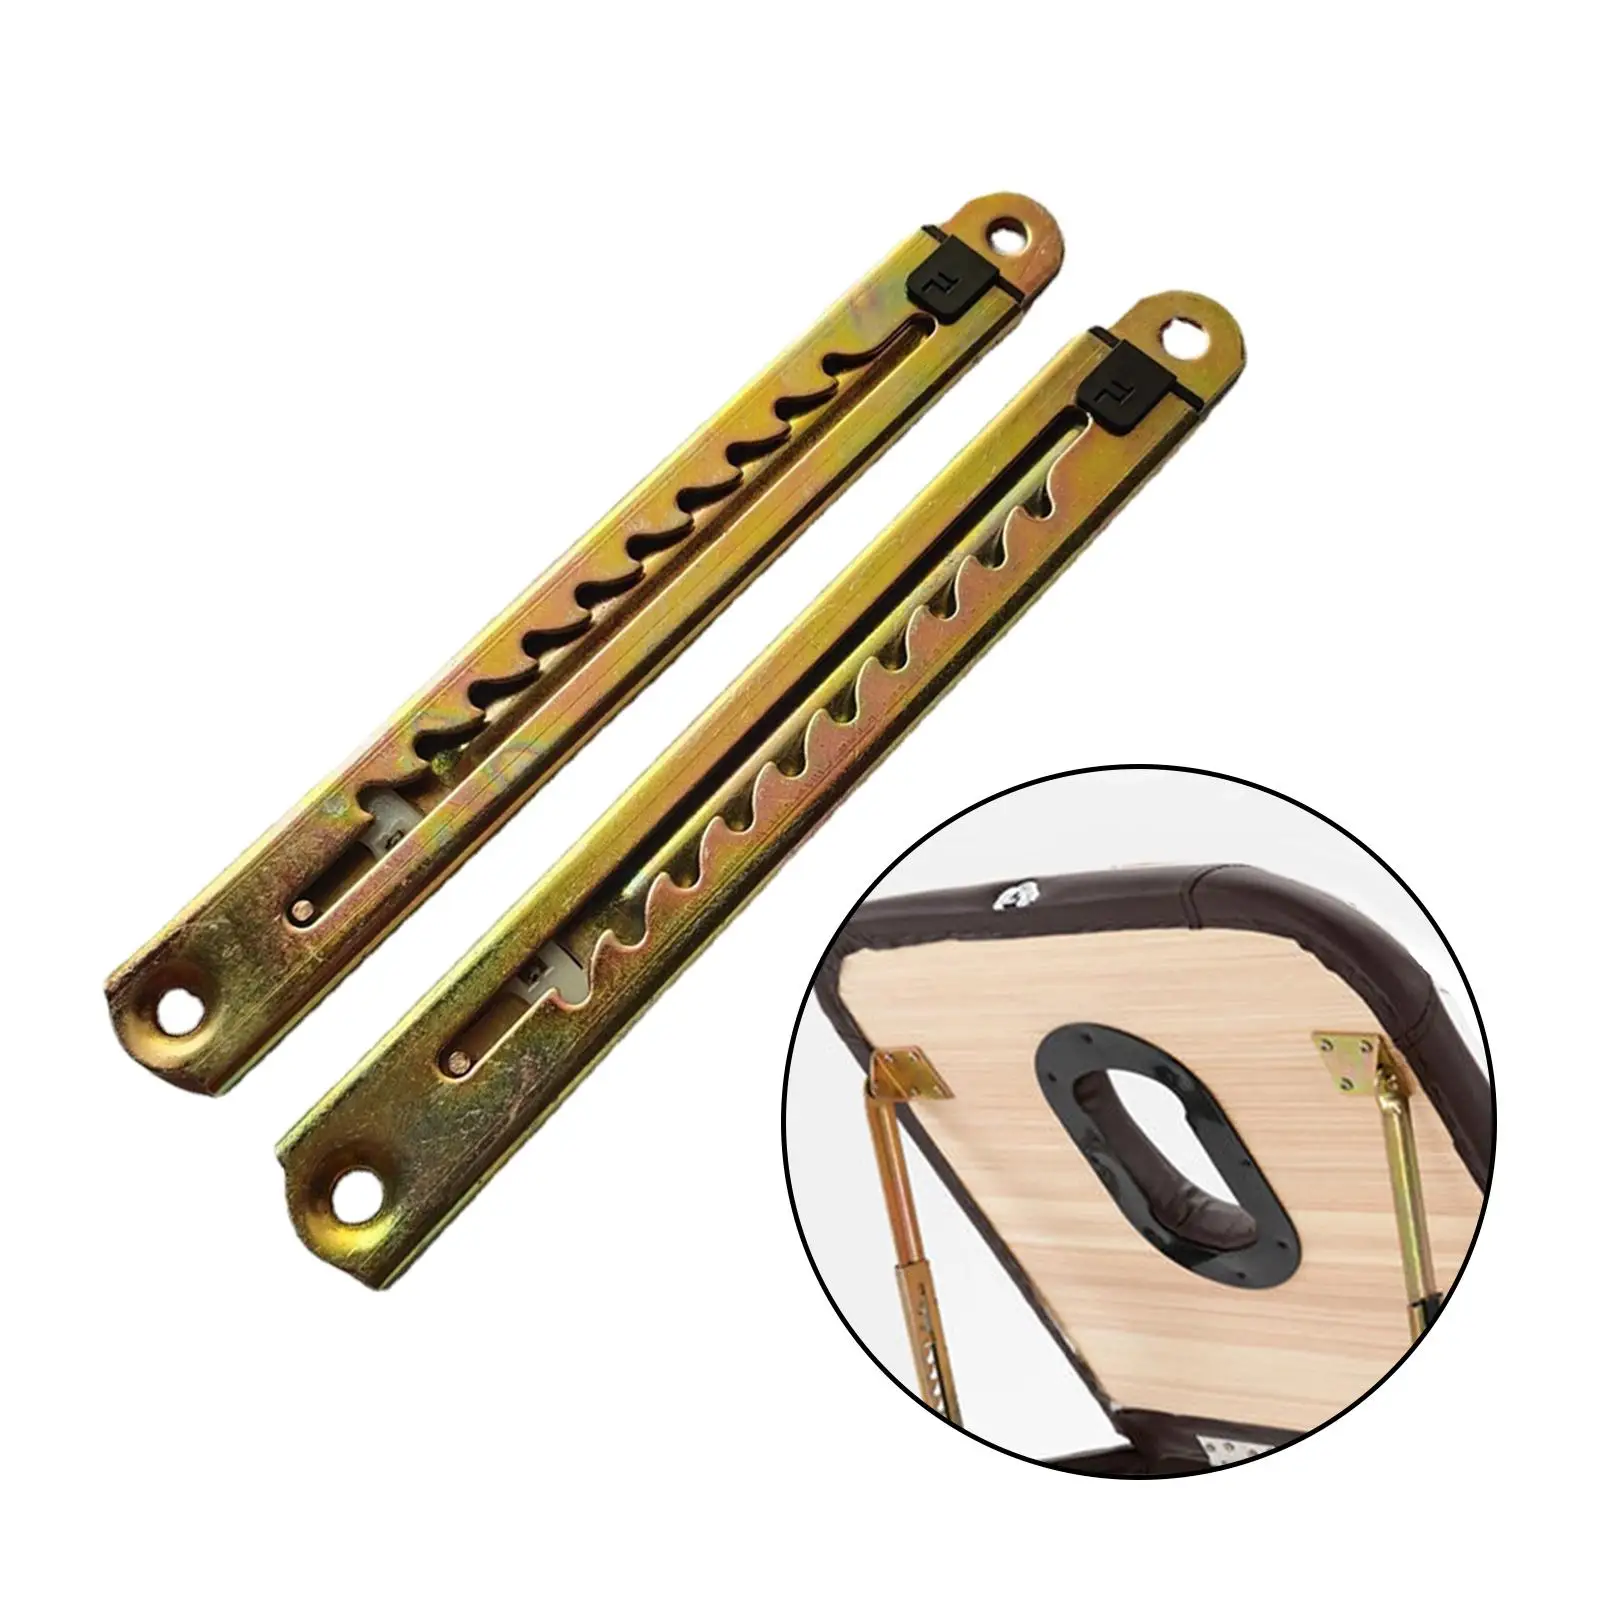 2Pcs Adjustable Lift Hinges Lift Up Support for Bed Furniture Accessory